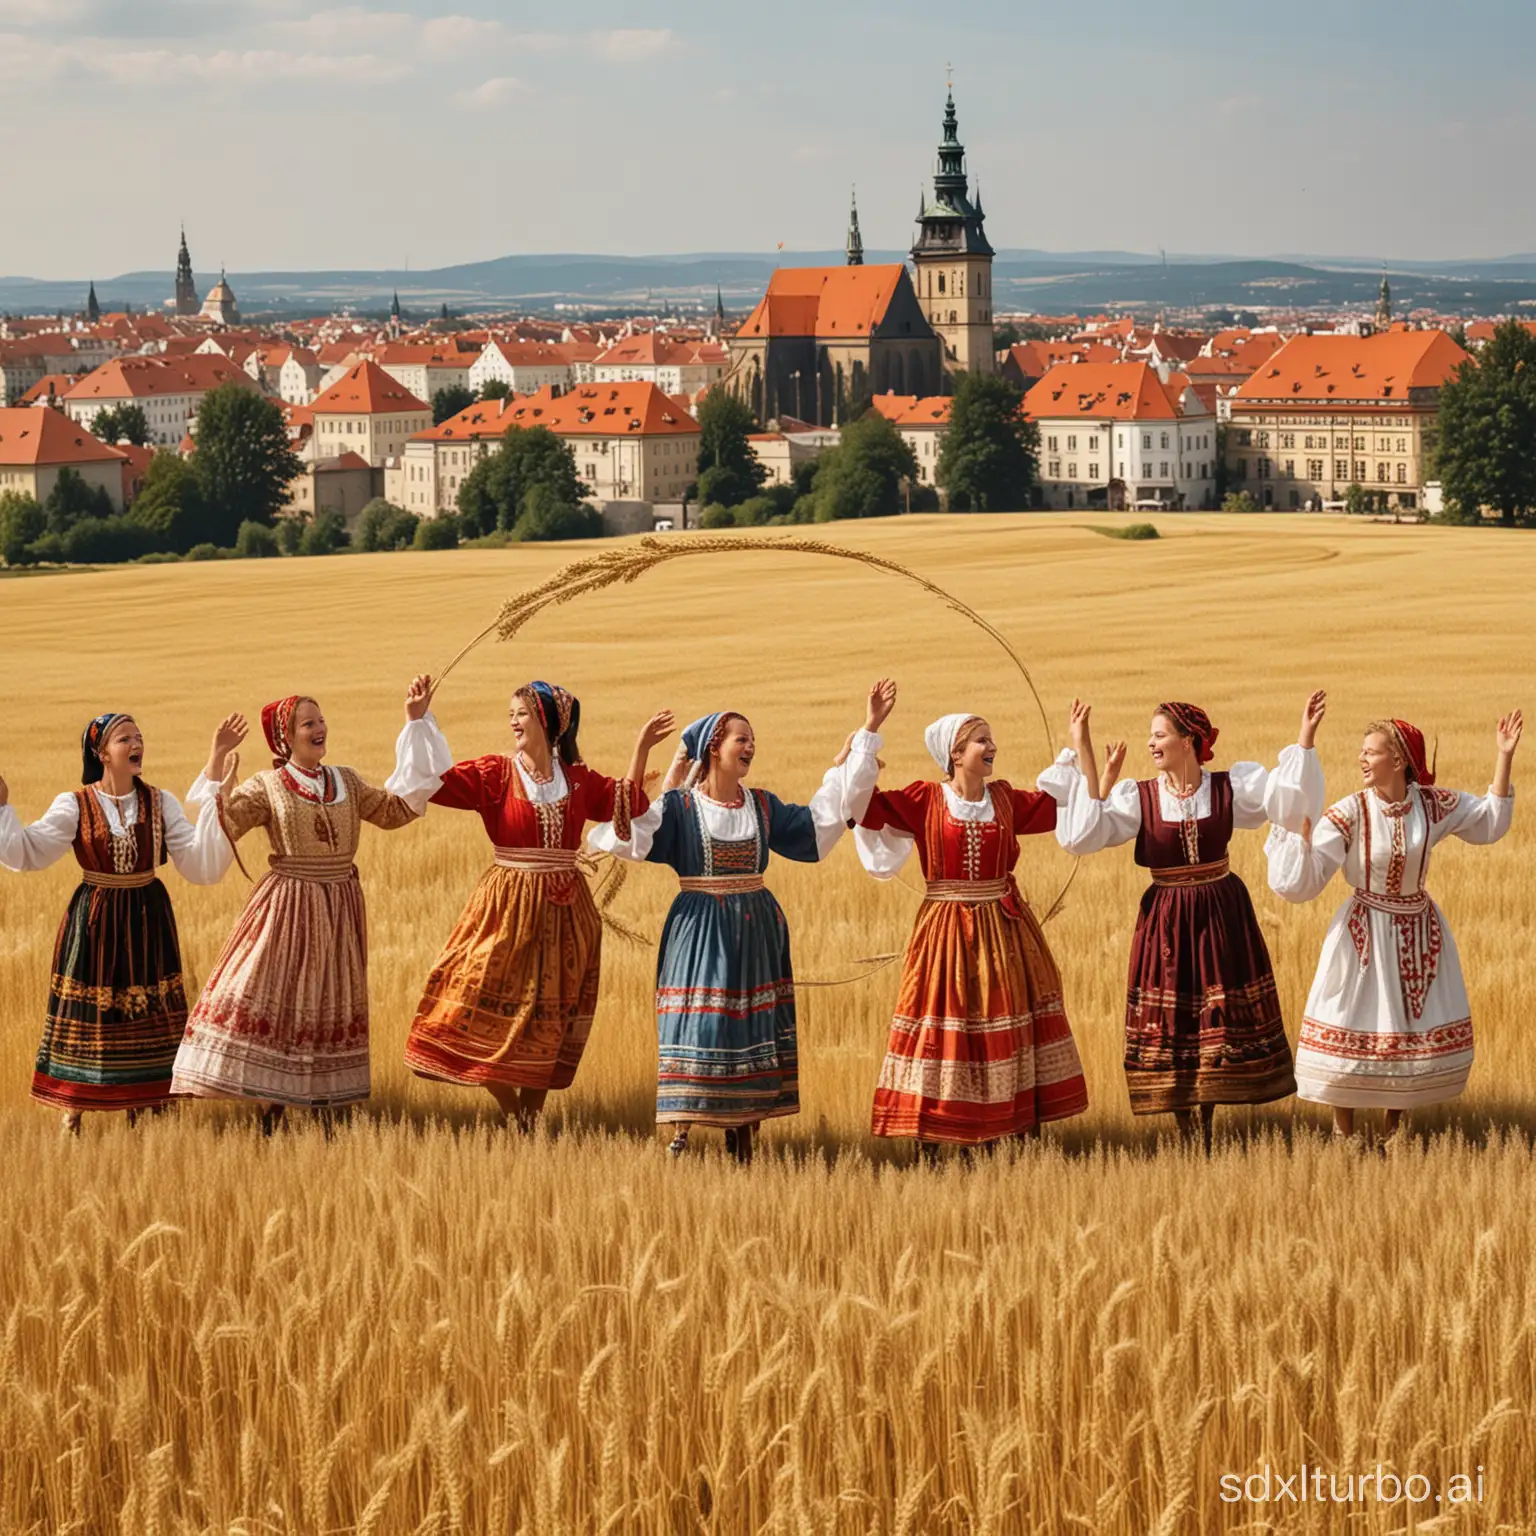 Please draw a picture of Czech people singing and dancing, wearing ethnic costumes in the wheat field, surrounded by a circle celebrating the harvest, only as background, no need for frontal faces, it should be full of childishness and innocence, with some musical performances, in the distance there are buildings in the Czech architectural style, imaginative and suitable for making a PPT cover.